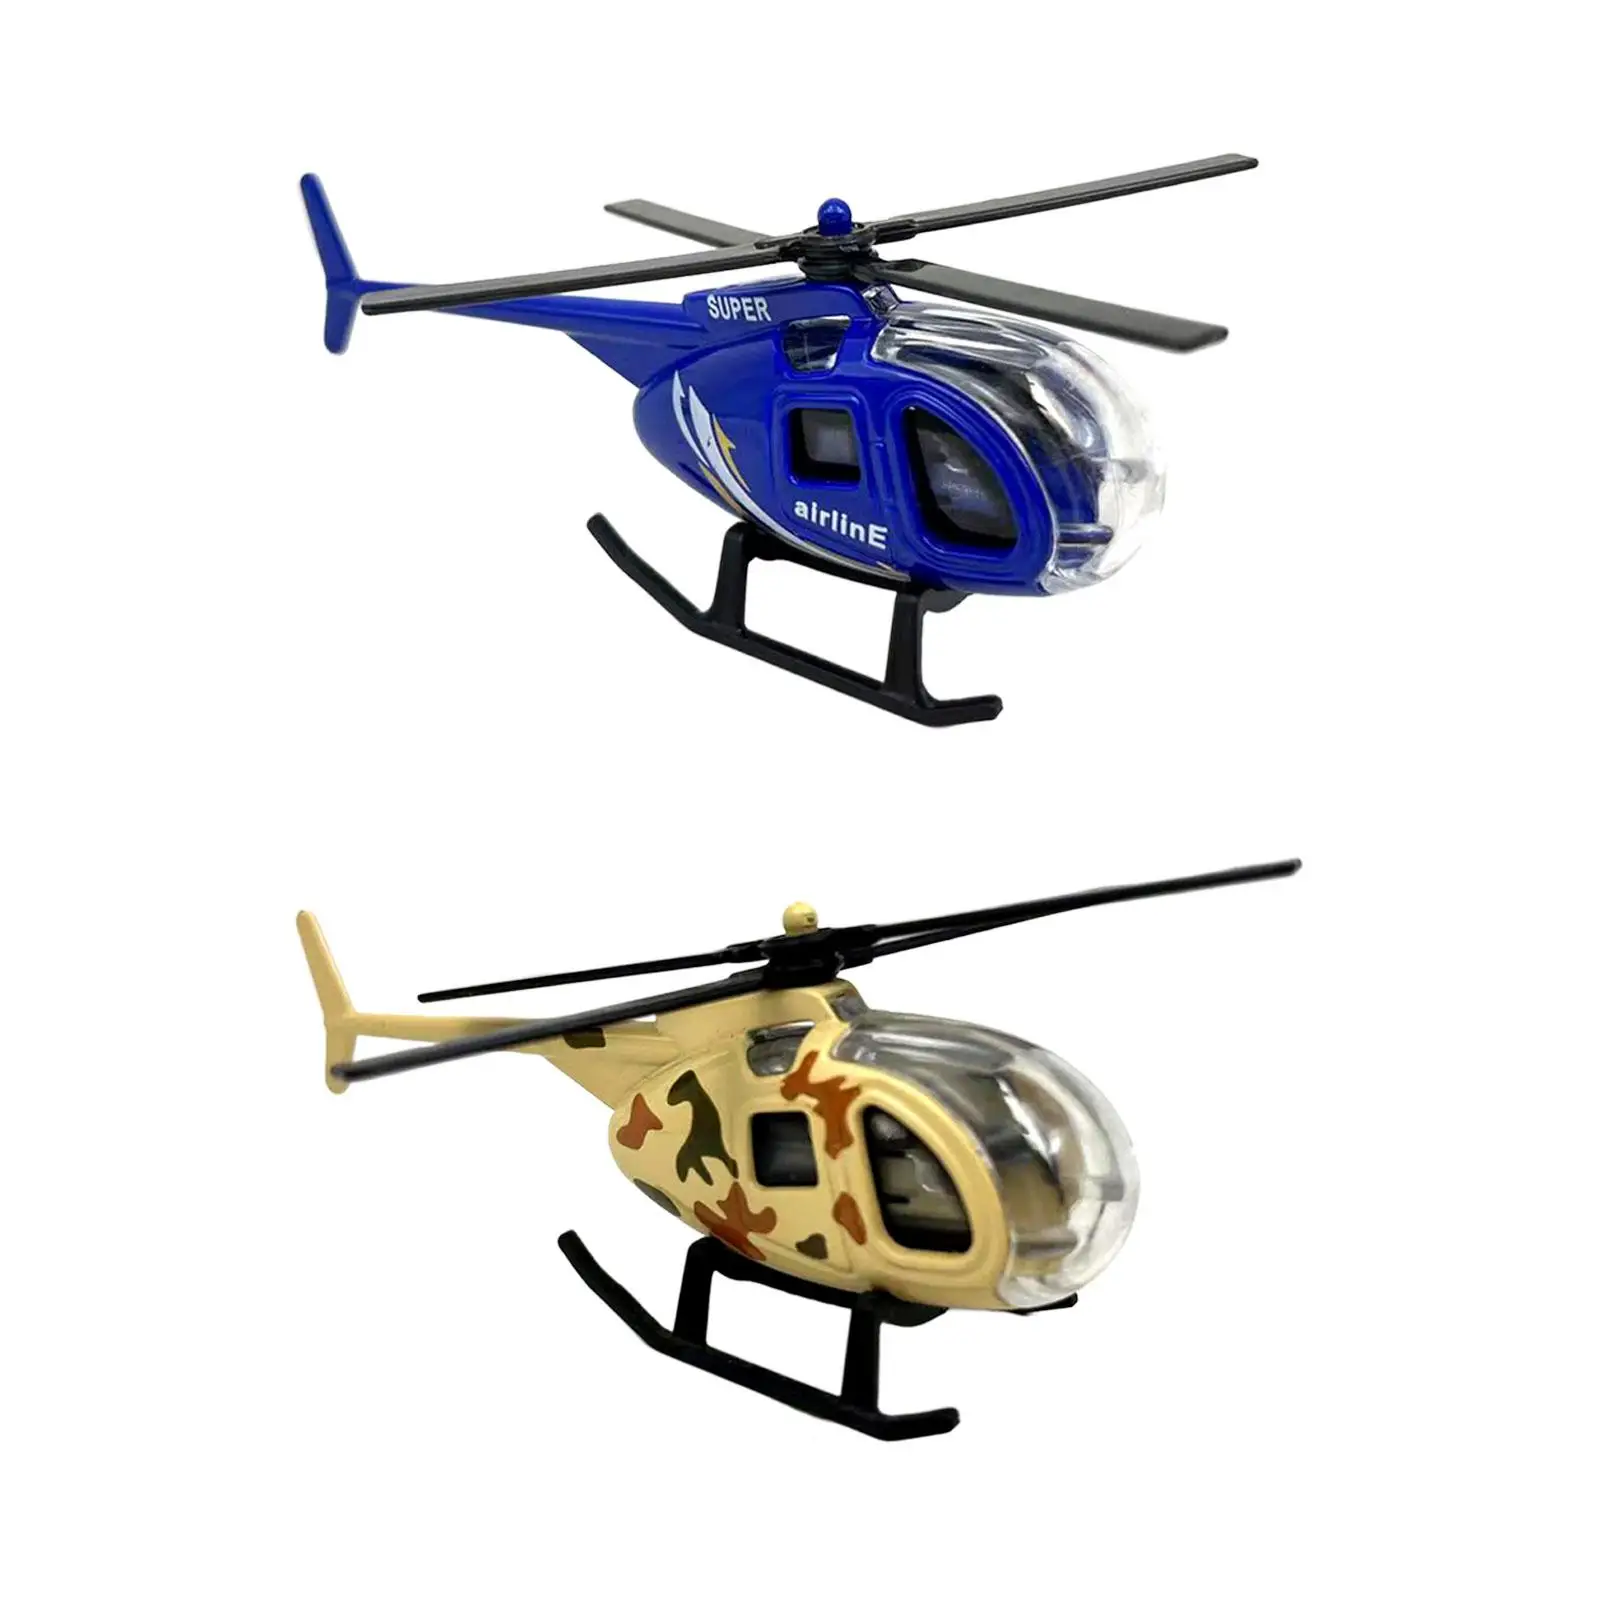 Small Diecast Alloy Helicopter Holiday Present Desktop Decor for Boys 3 4 5 6 7 Year Old Party Favor Airplane Toy Plane Model